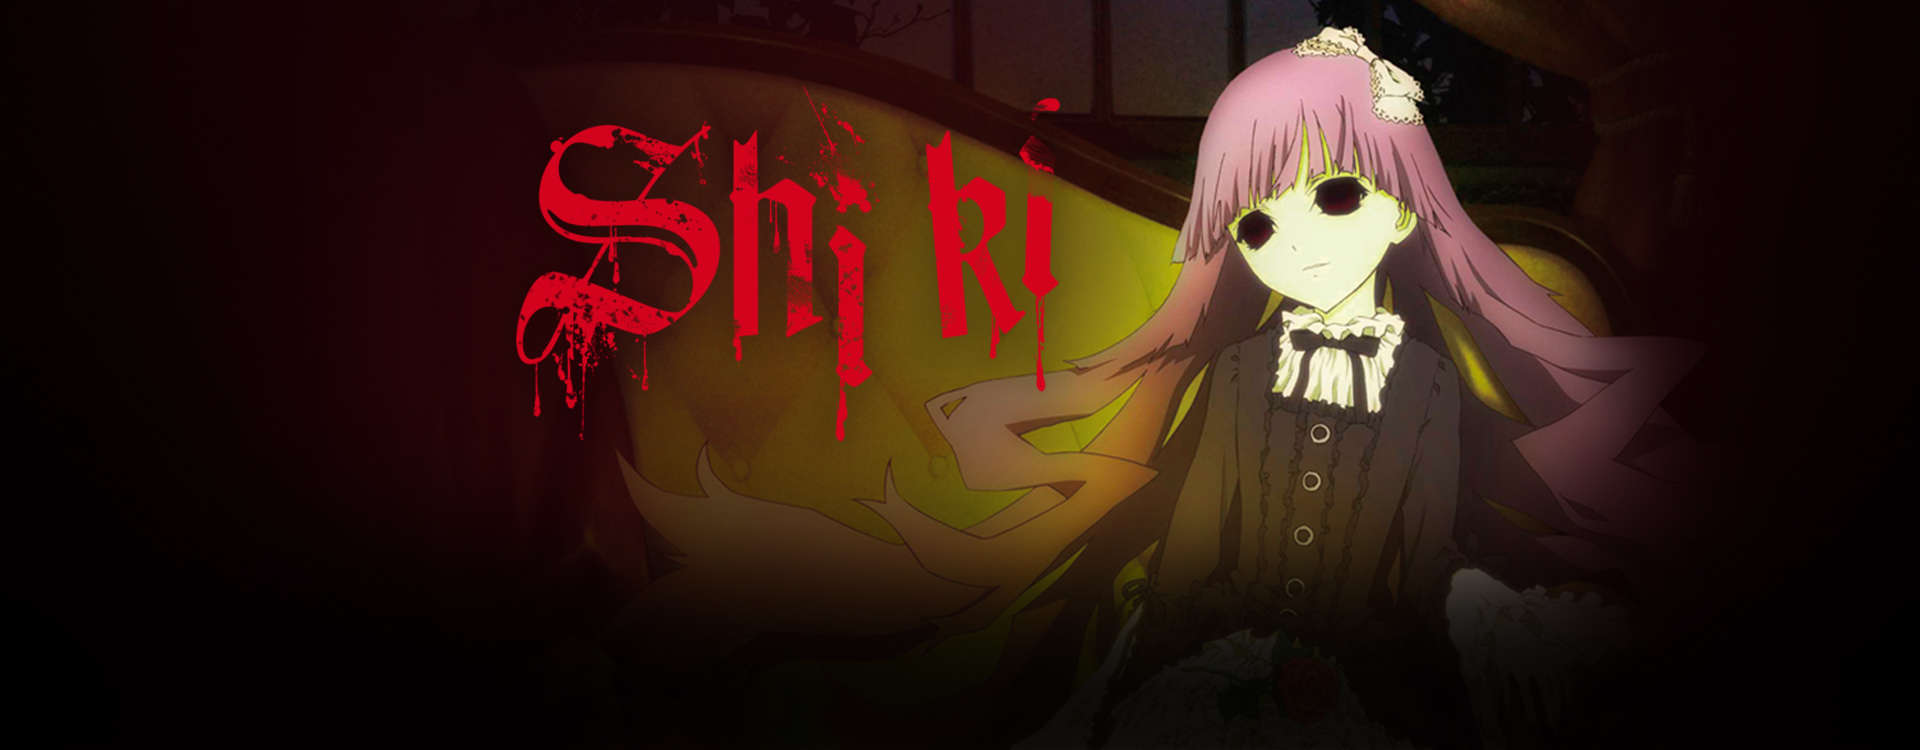 Shiki Episodes 1-6 Streaming - Review - Anime News Network